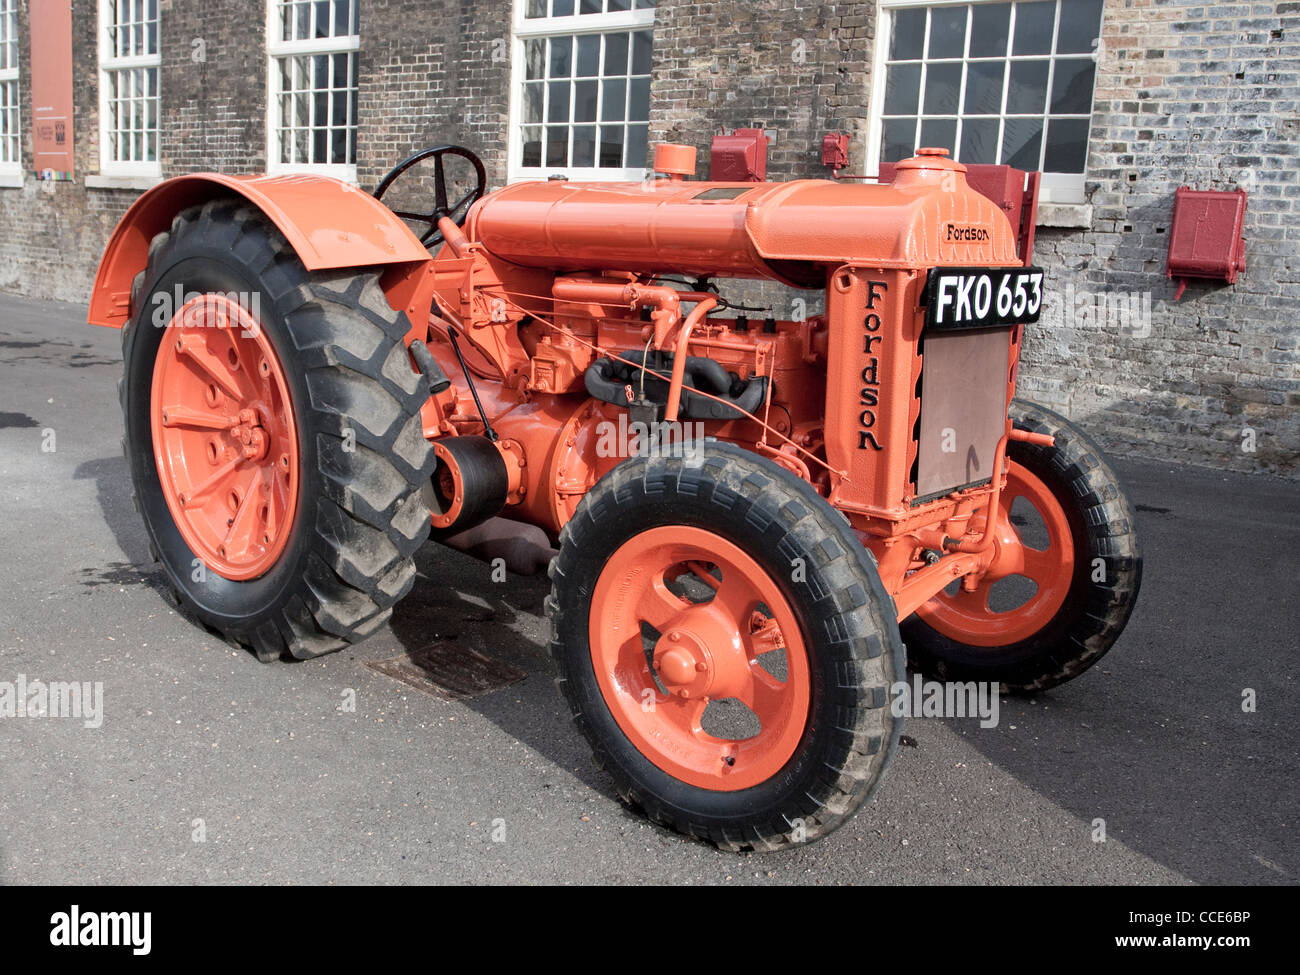 1940s salute to the 40s chatham dockyard uk Vintage Fordson Tractor  FKO 653 Stock Photo